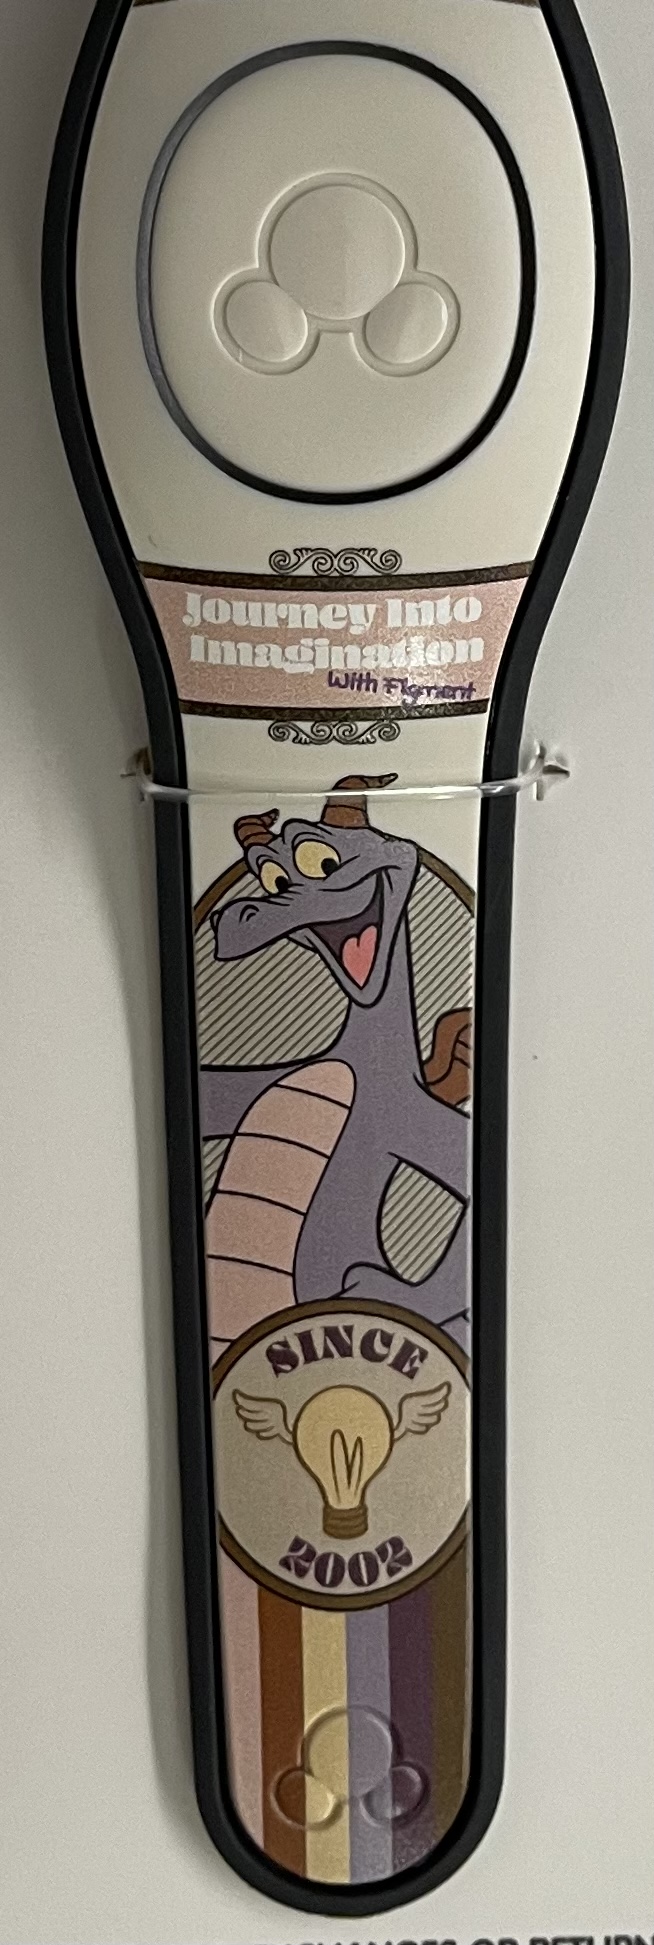 Journey into Imagination with Figment Limited Release MagicBand is now out for purchase